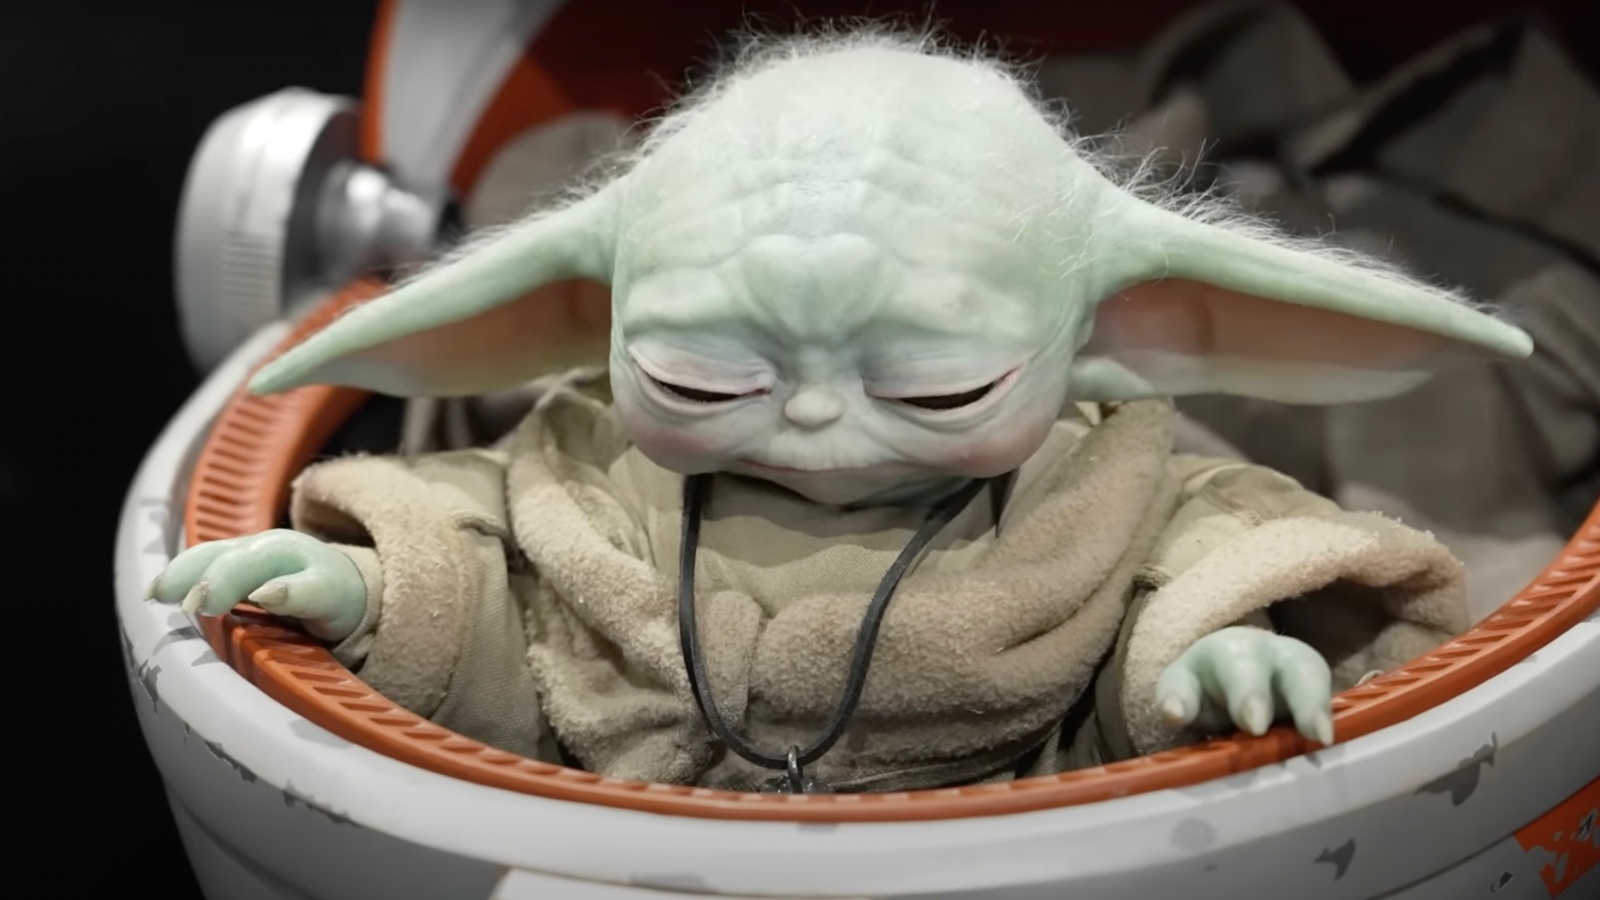 Star Wars fans react to $100,000 Grogu toy: “Mf better be a real